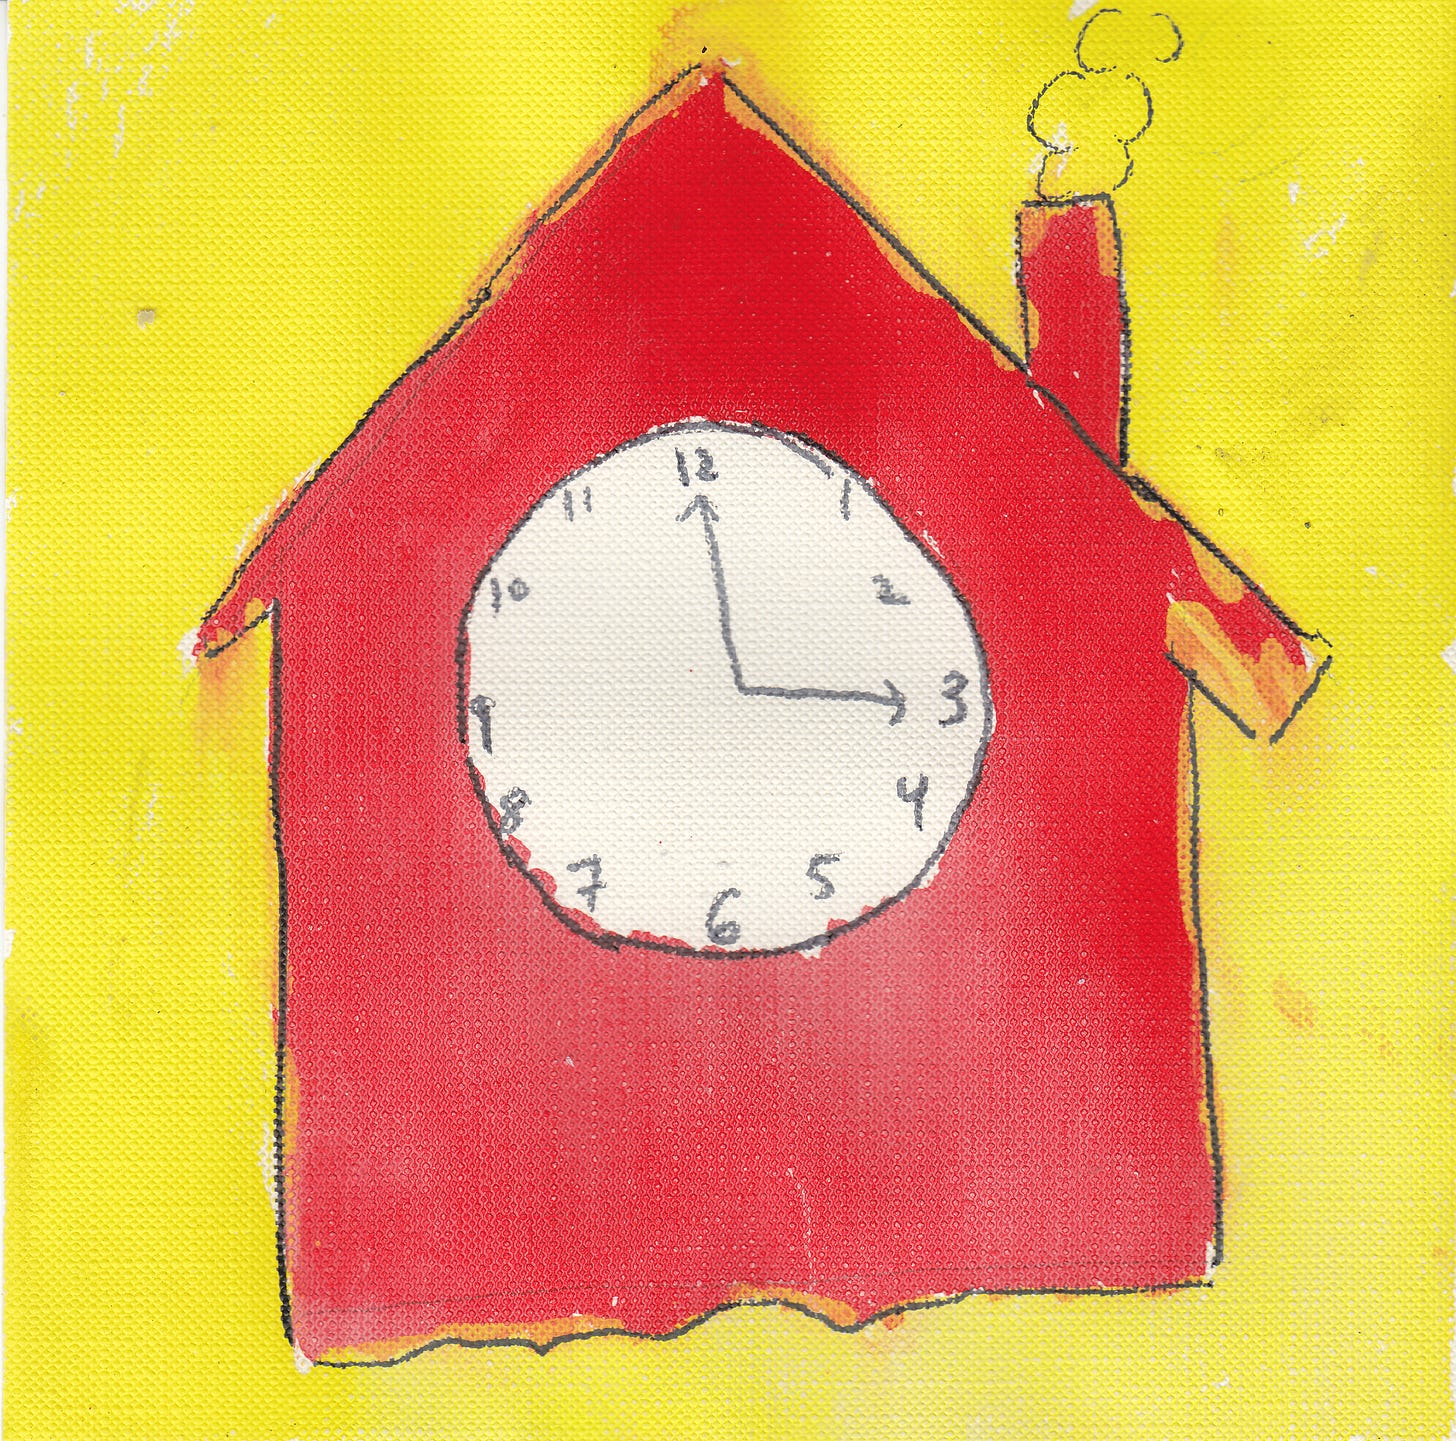 red house with a clock. yellow background